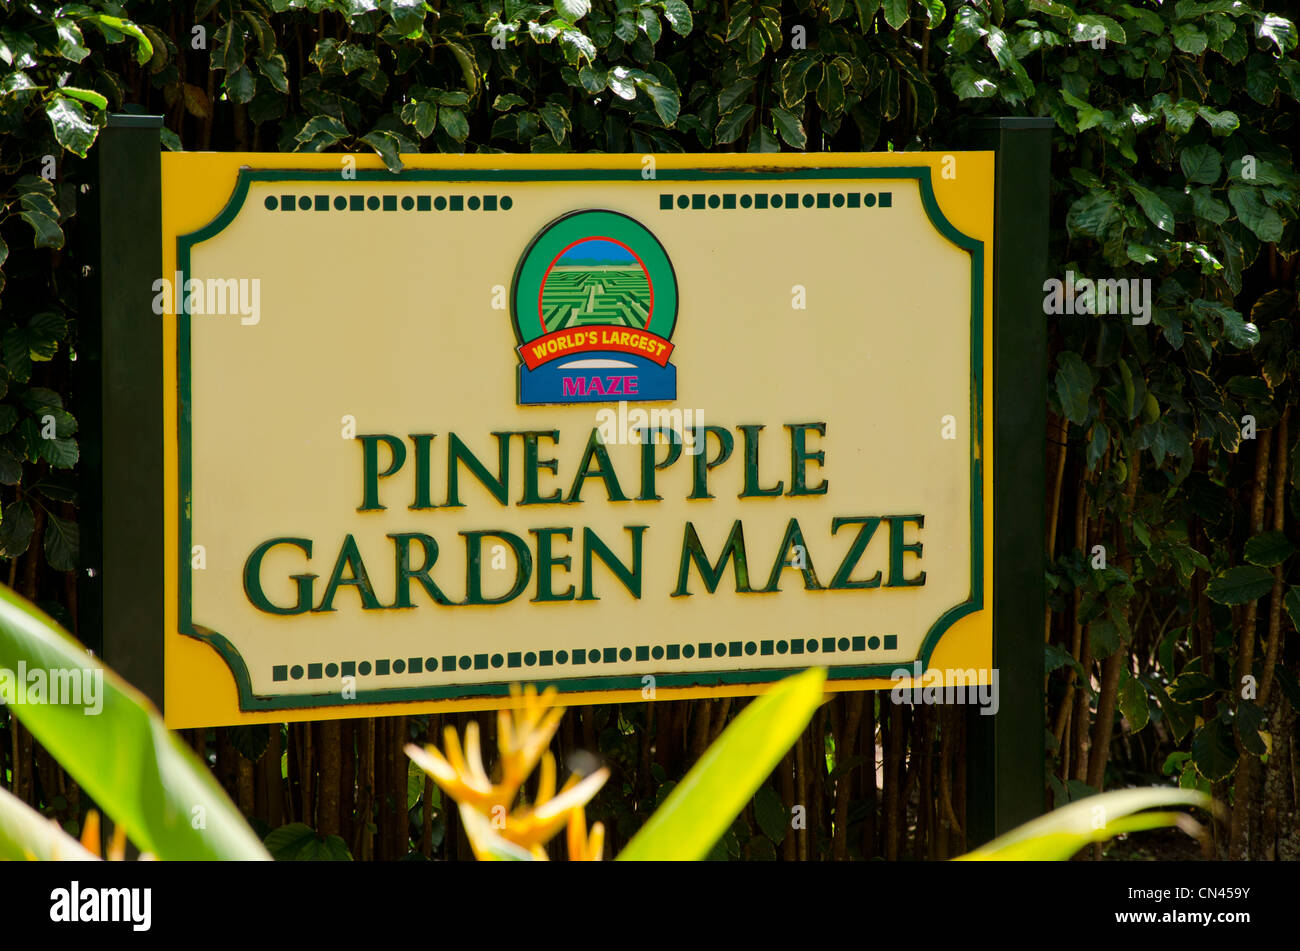 Sign For The Pineapple Garden Maze At The Dole Plantation In